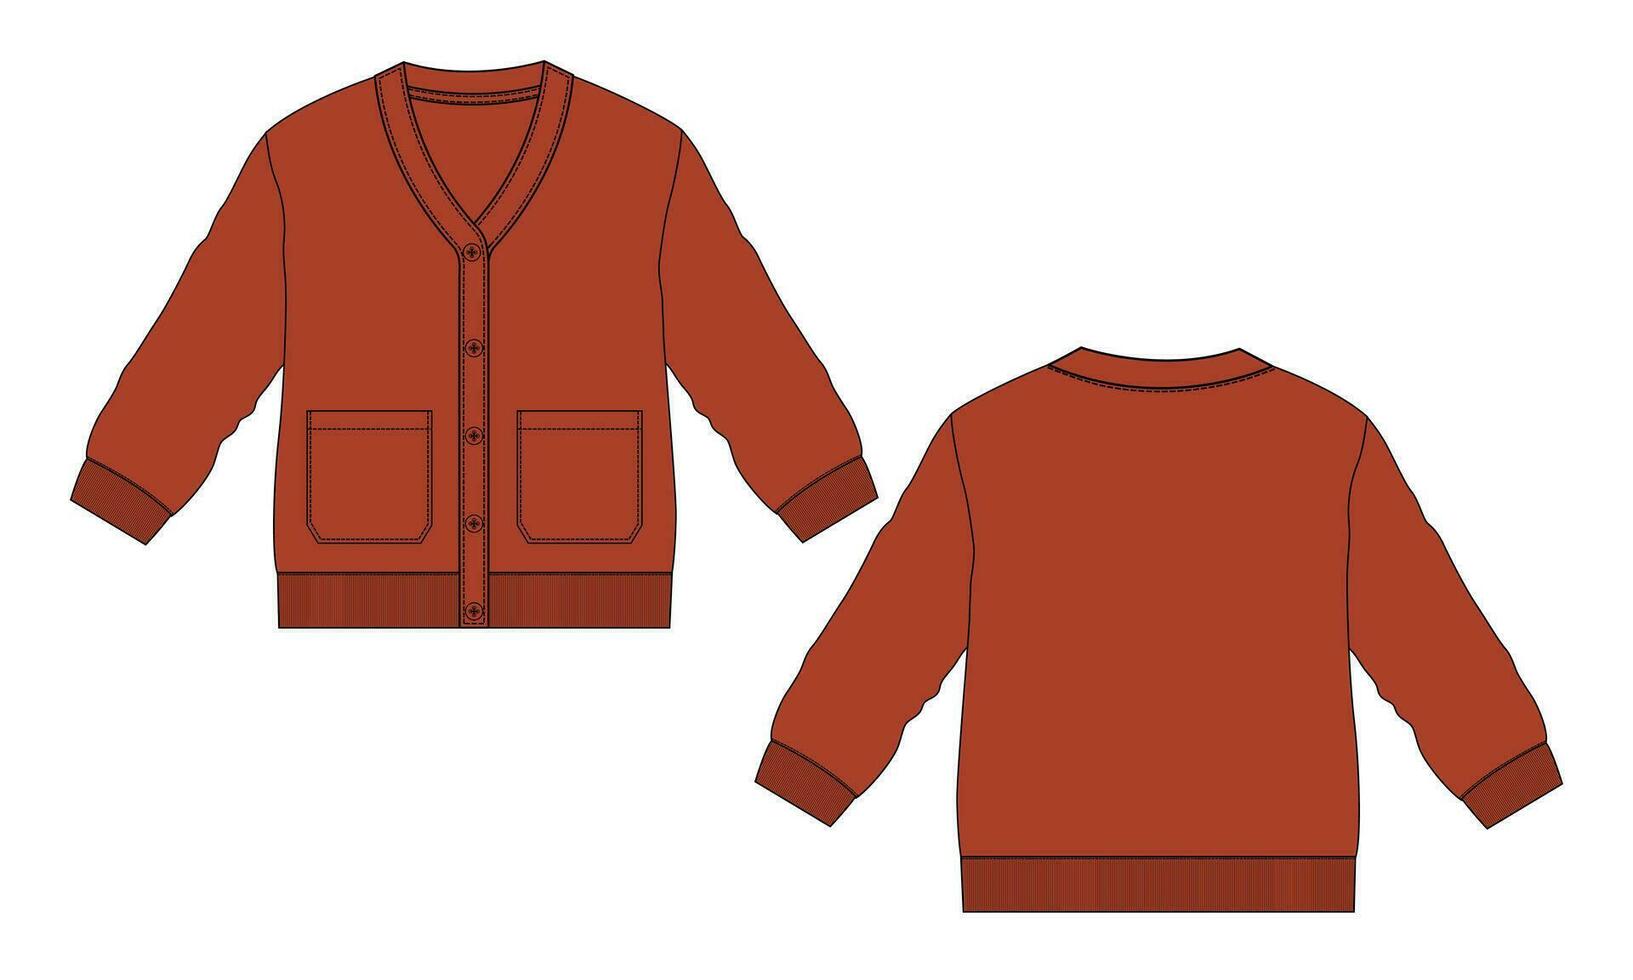 Cardigan vector illustration template Front and back